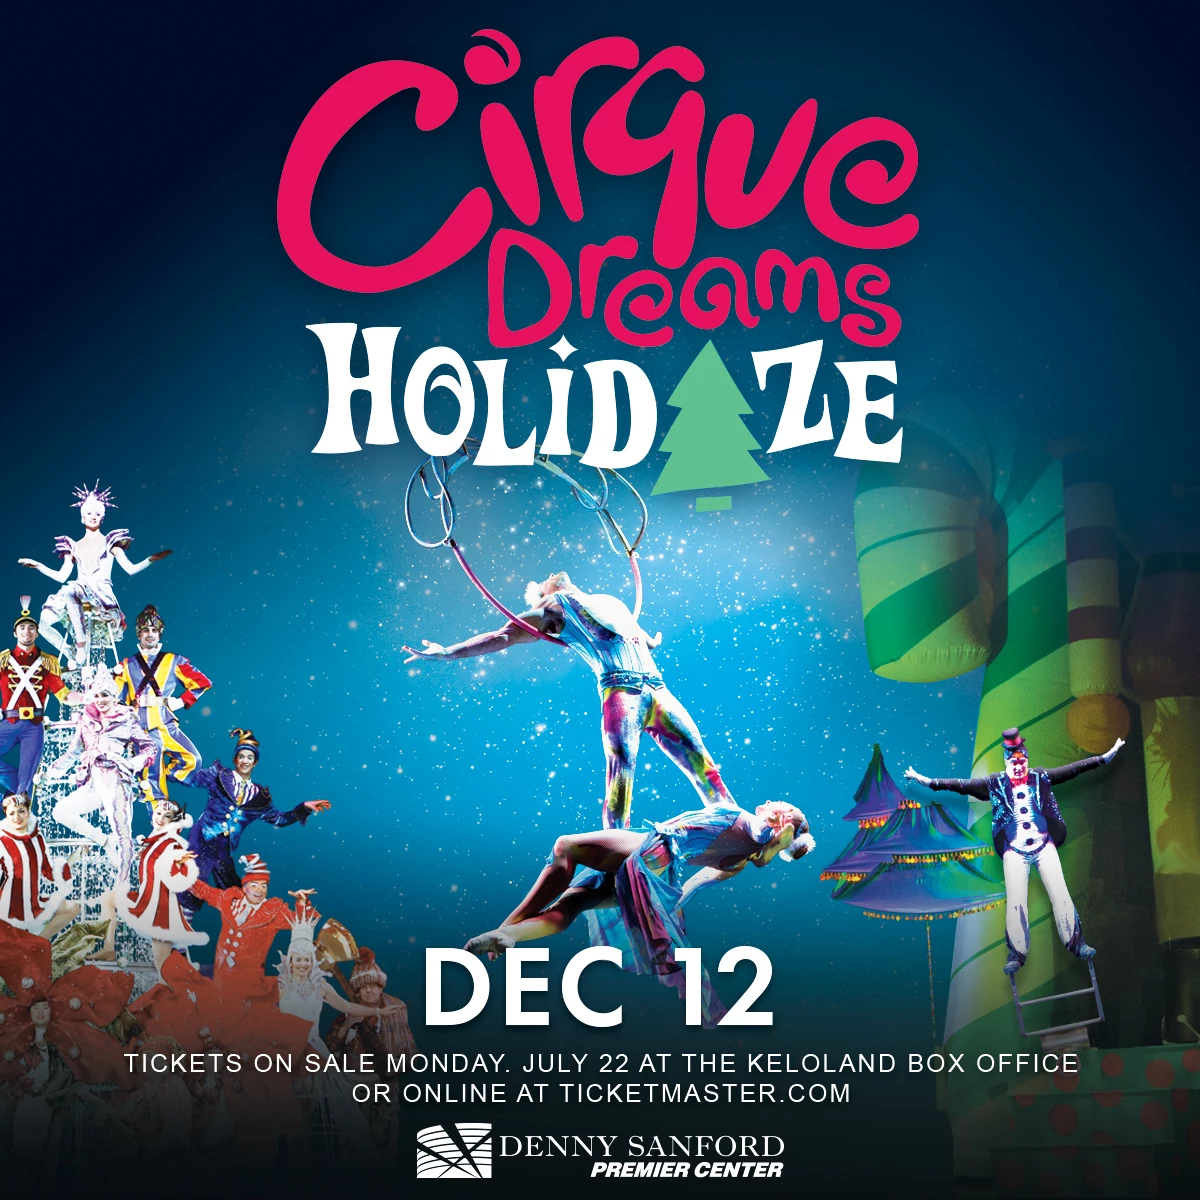 We're Halfway to the Holidays with Cirque Dreams Holidaze